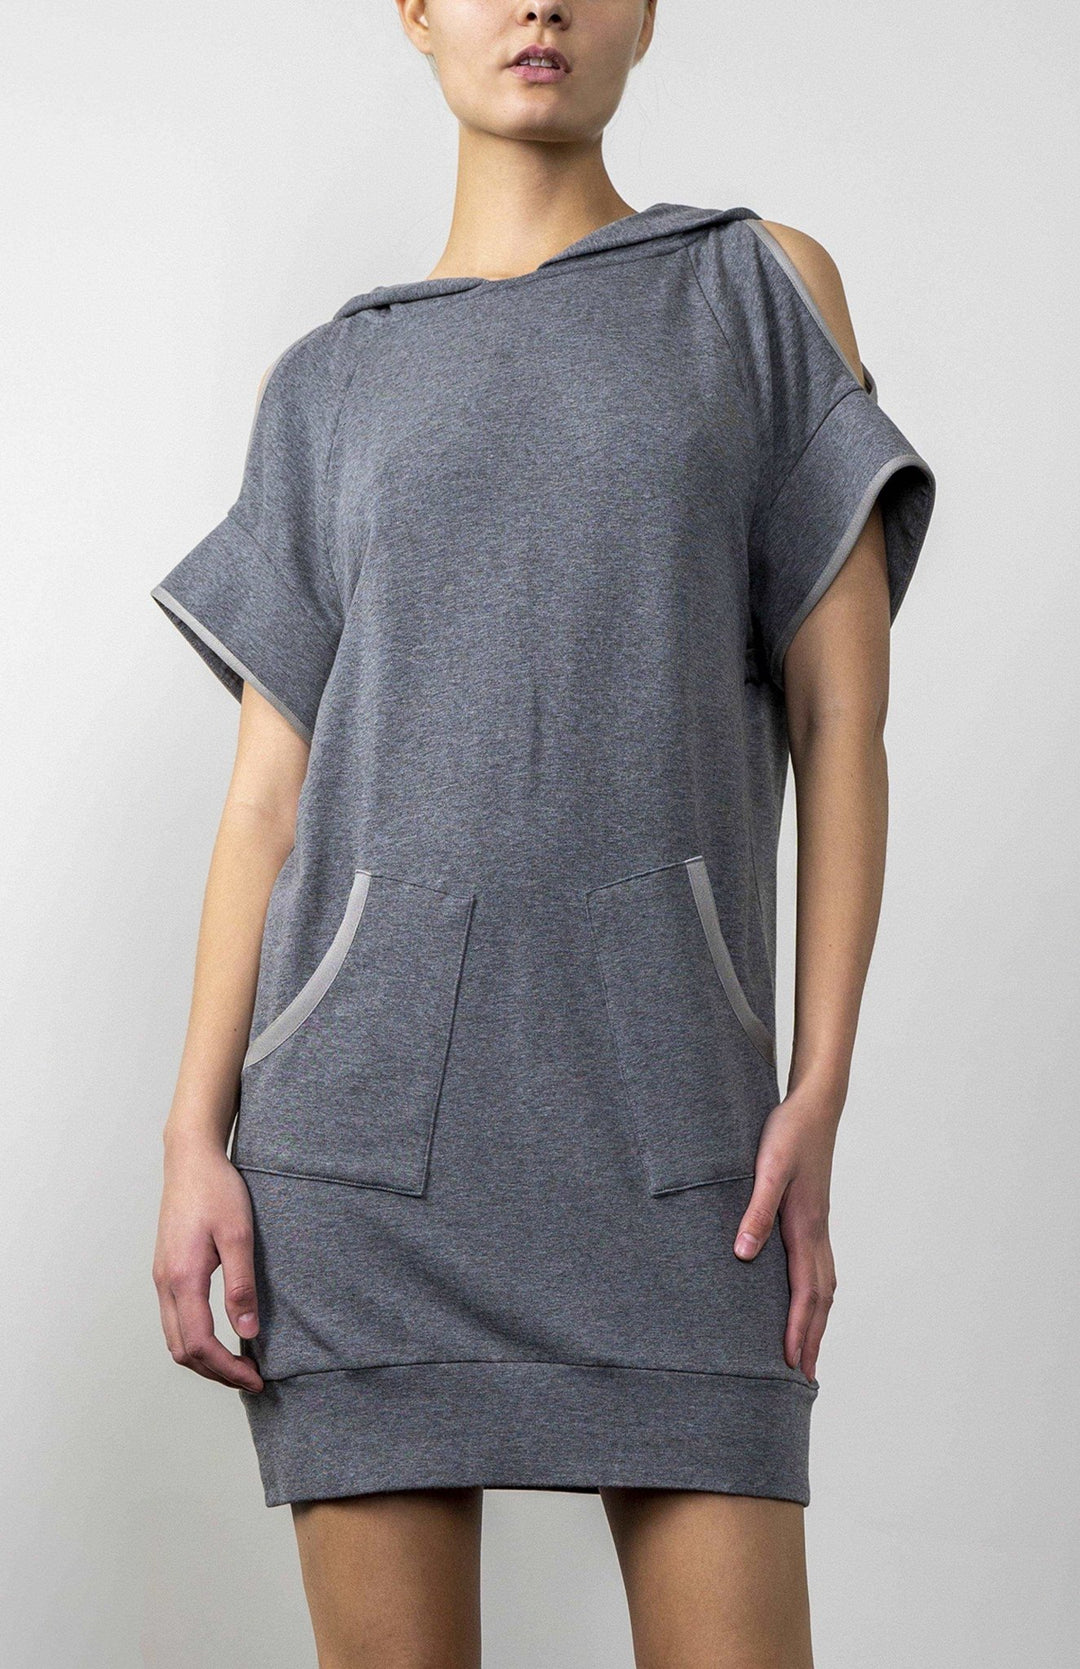 Futuristic, Kimono style, smart casual, short,  designer sweat dress in lux dark grey jersey knit. Contrast binding, cold shoulder cutouts, draped sleeves and oversized hood.